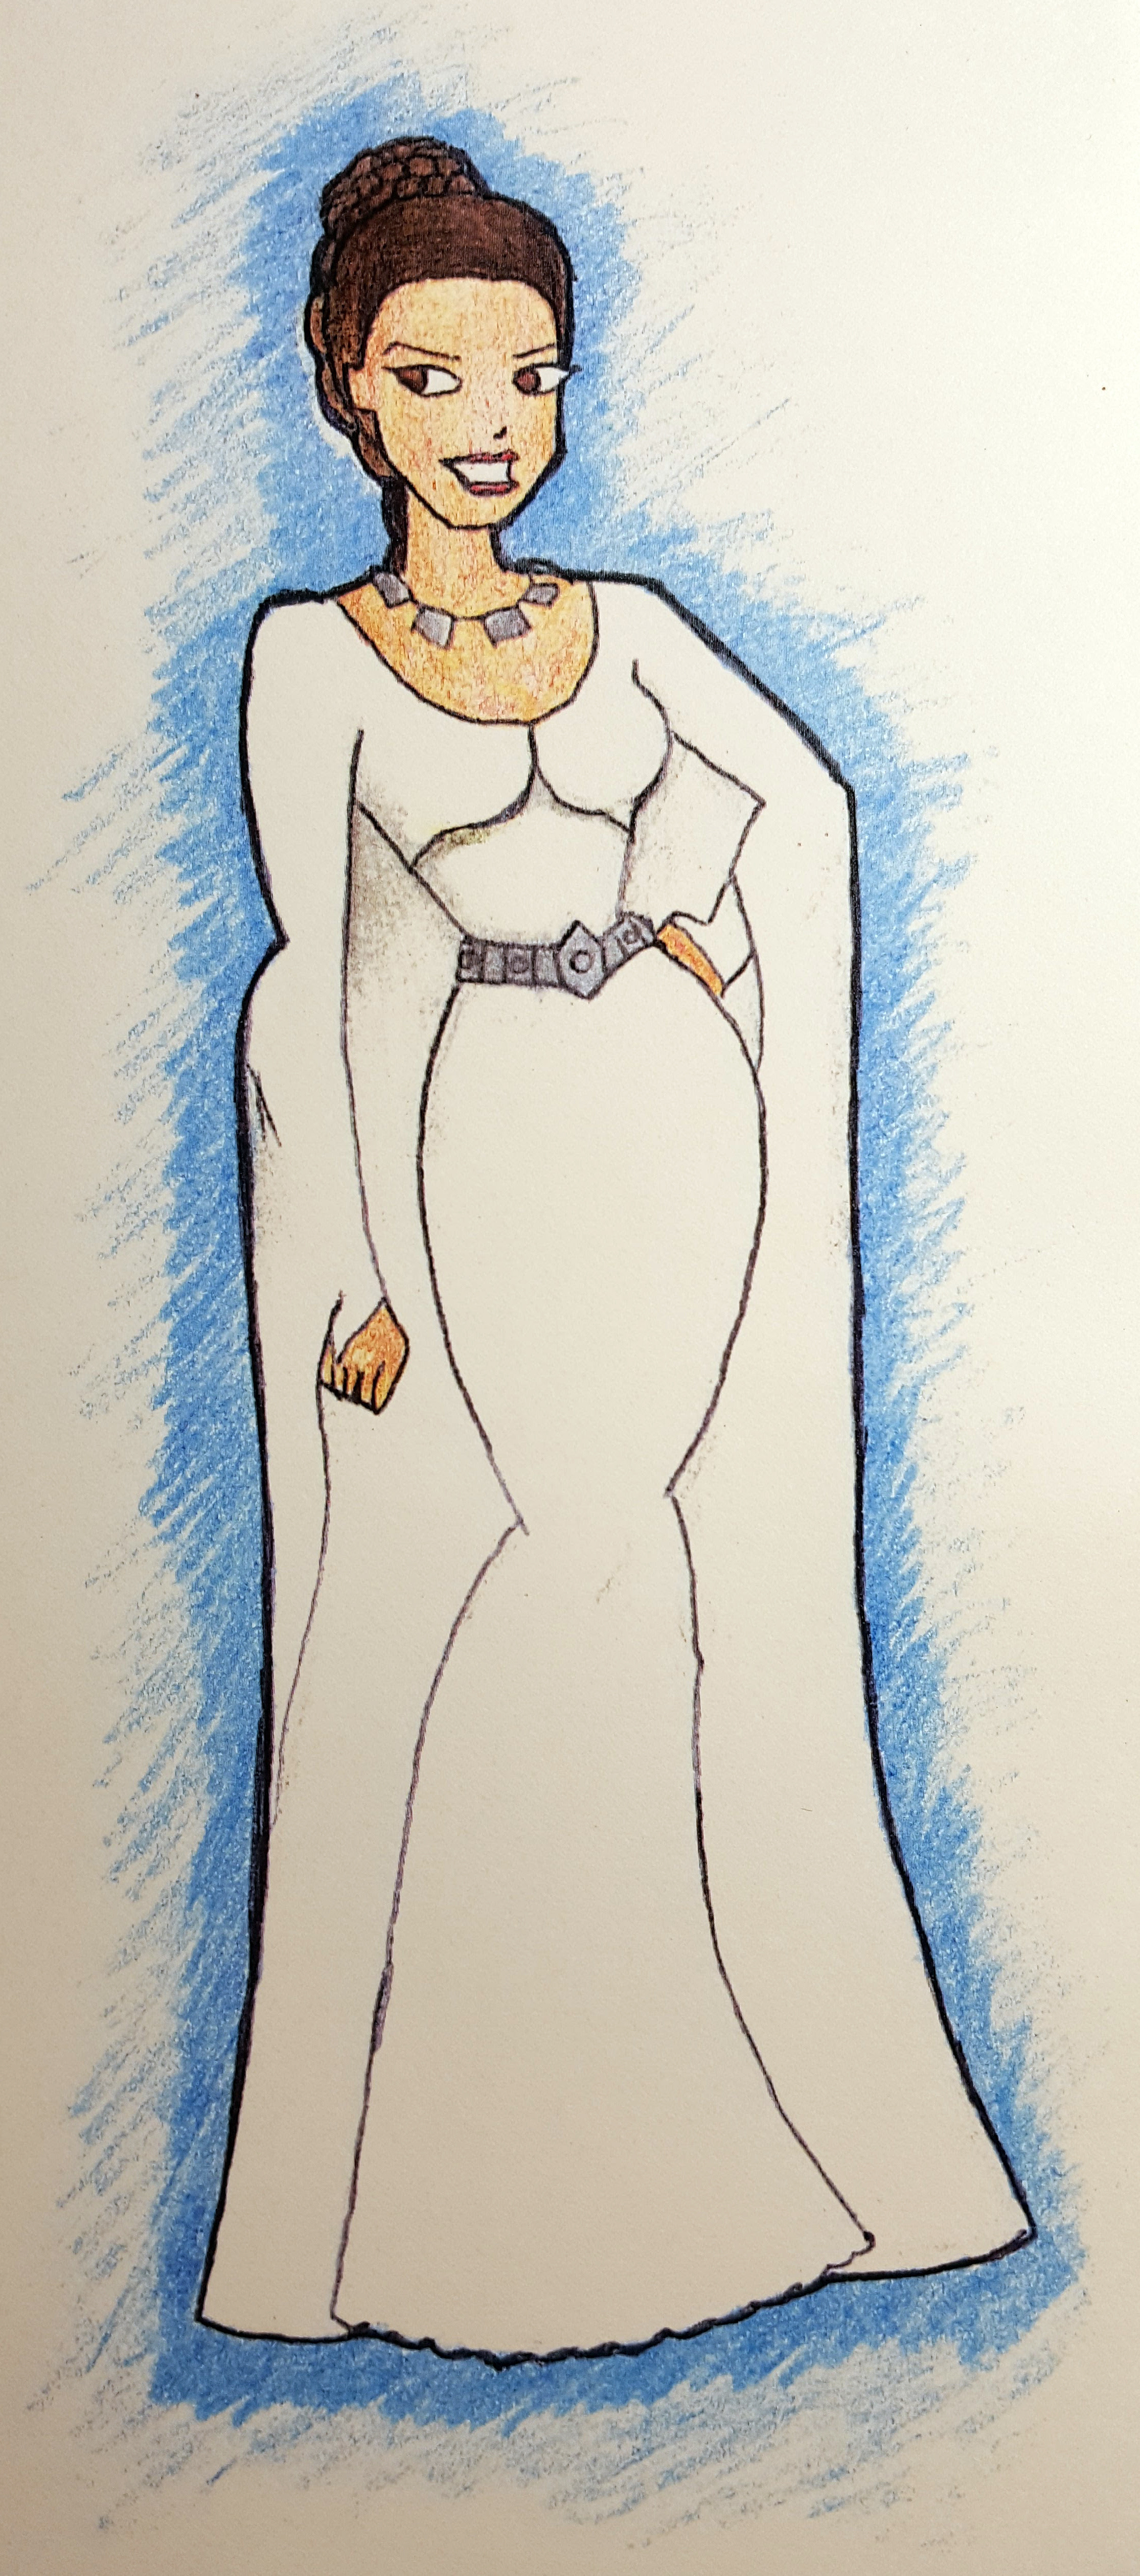 Another envelope; Leia's ceremonial gown from Ep. 4.